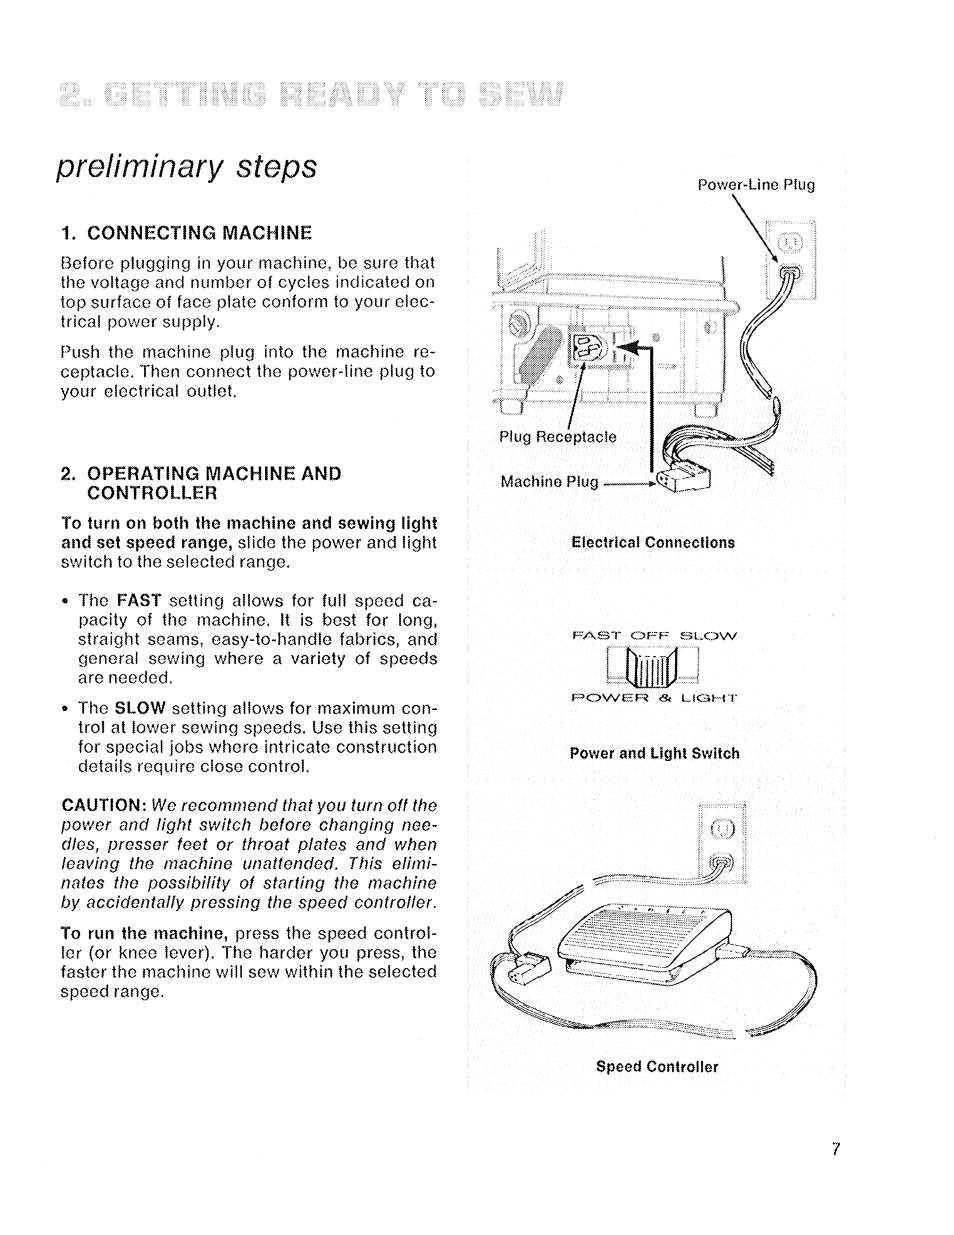 Preliminary steps, Connecting machine, 2, operating machine and controller | Preliitunary steps | SINGER 719 User Manual | Page 9 / 36